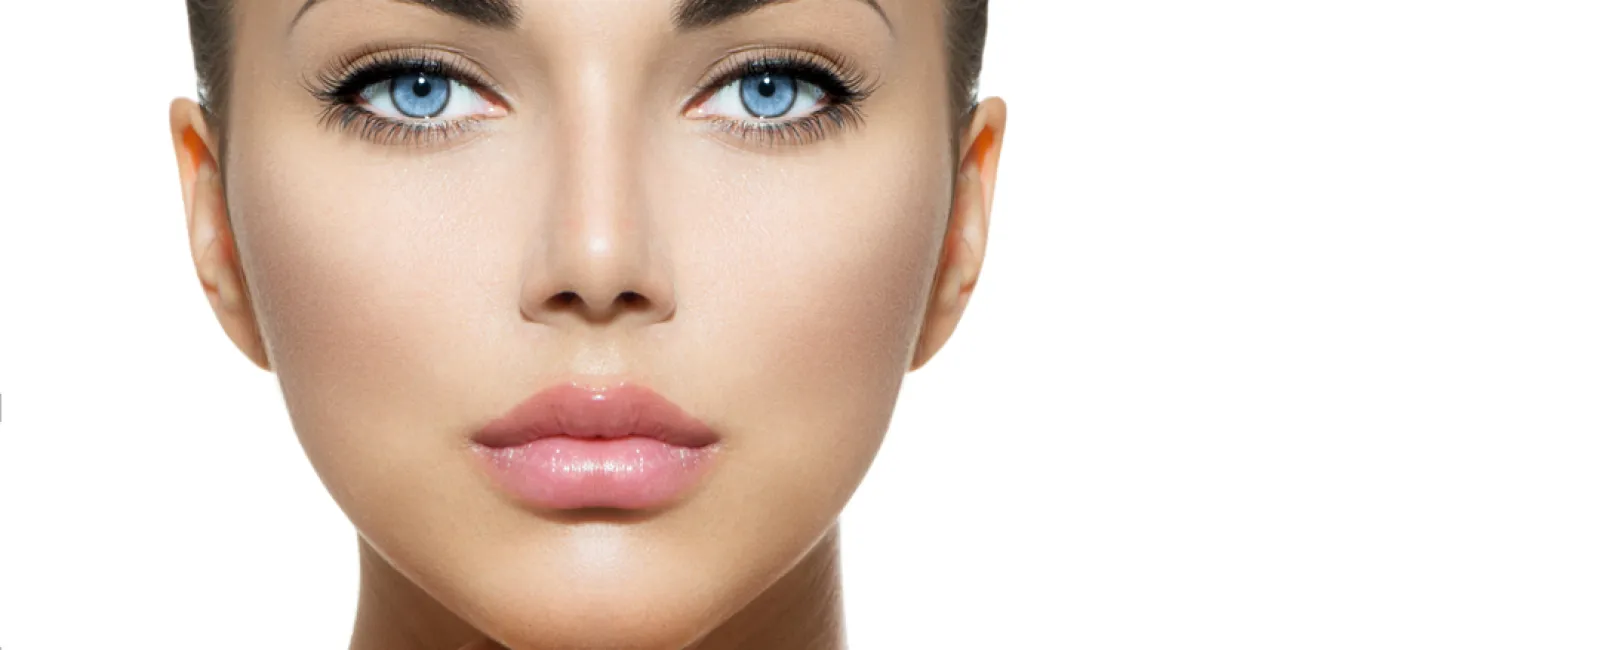 Surgical Options for Improving Your Appearance